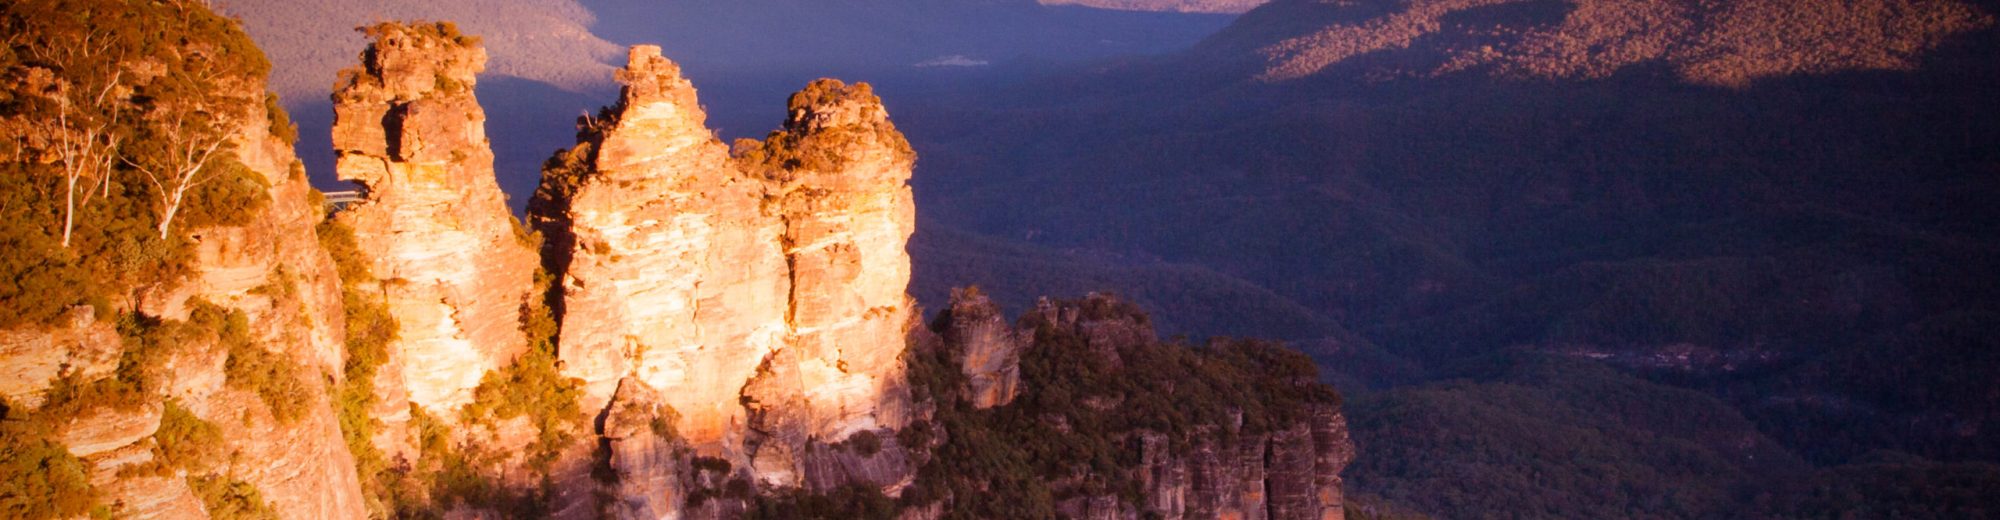 The Three Sisters rock formation at sunset in the Blue Mountains, New South Wales, Australia